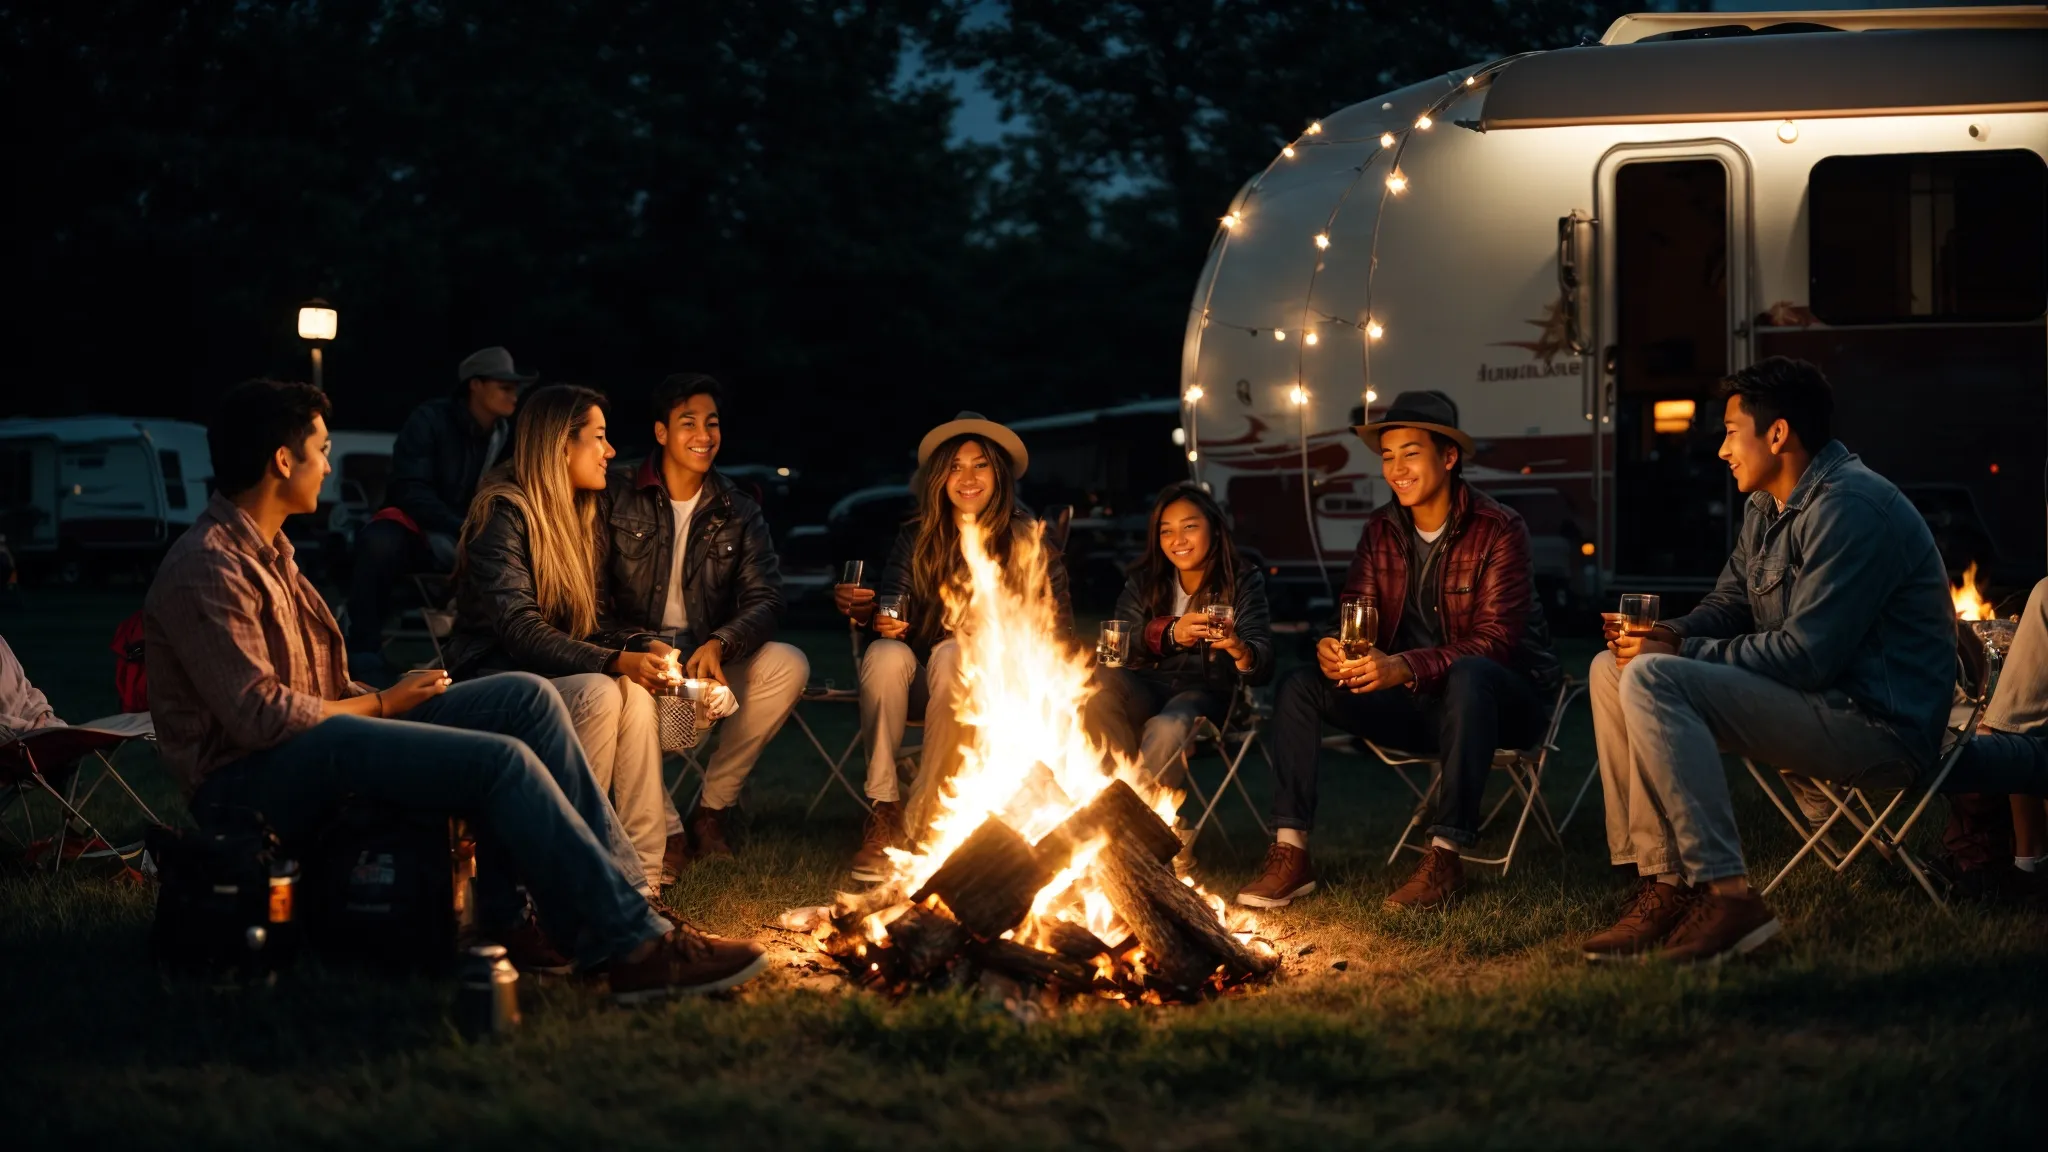 families and friends gather around a crackling campfire, enjoying an evening event at a lively rv park.